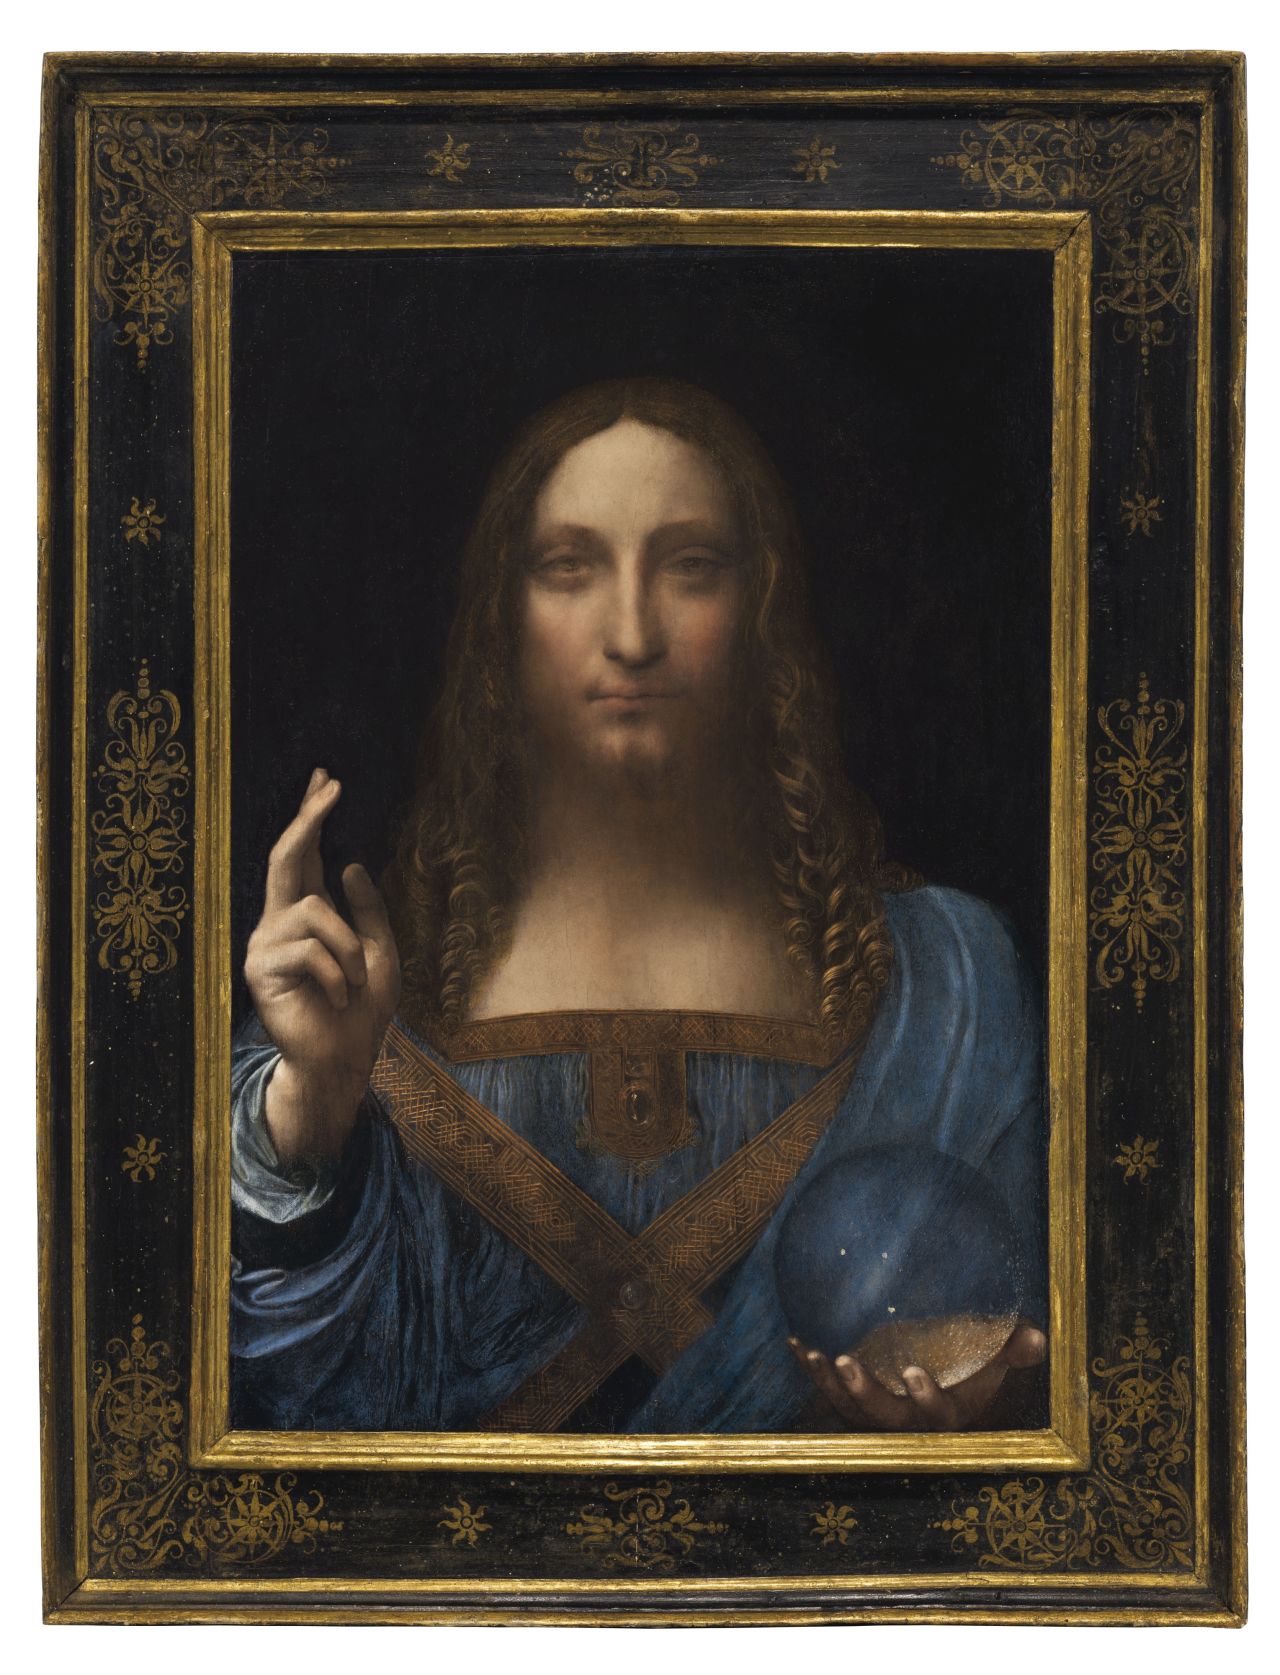 "Salvator Mundi" ("Savior of the World") is one of fewer than 20 known paintings by da Vinci.